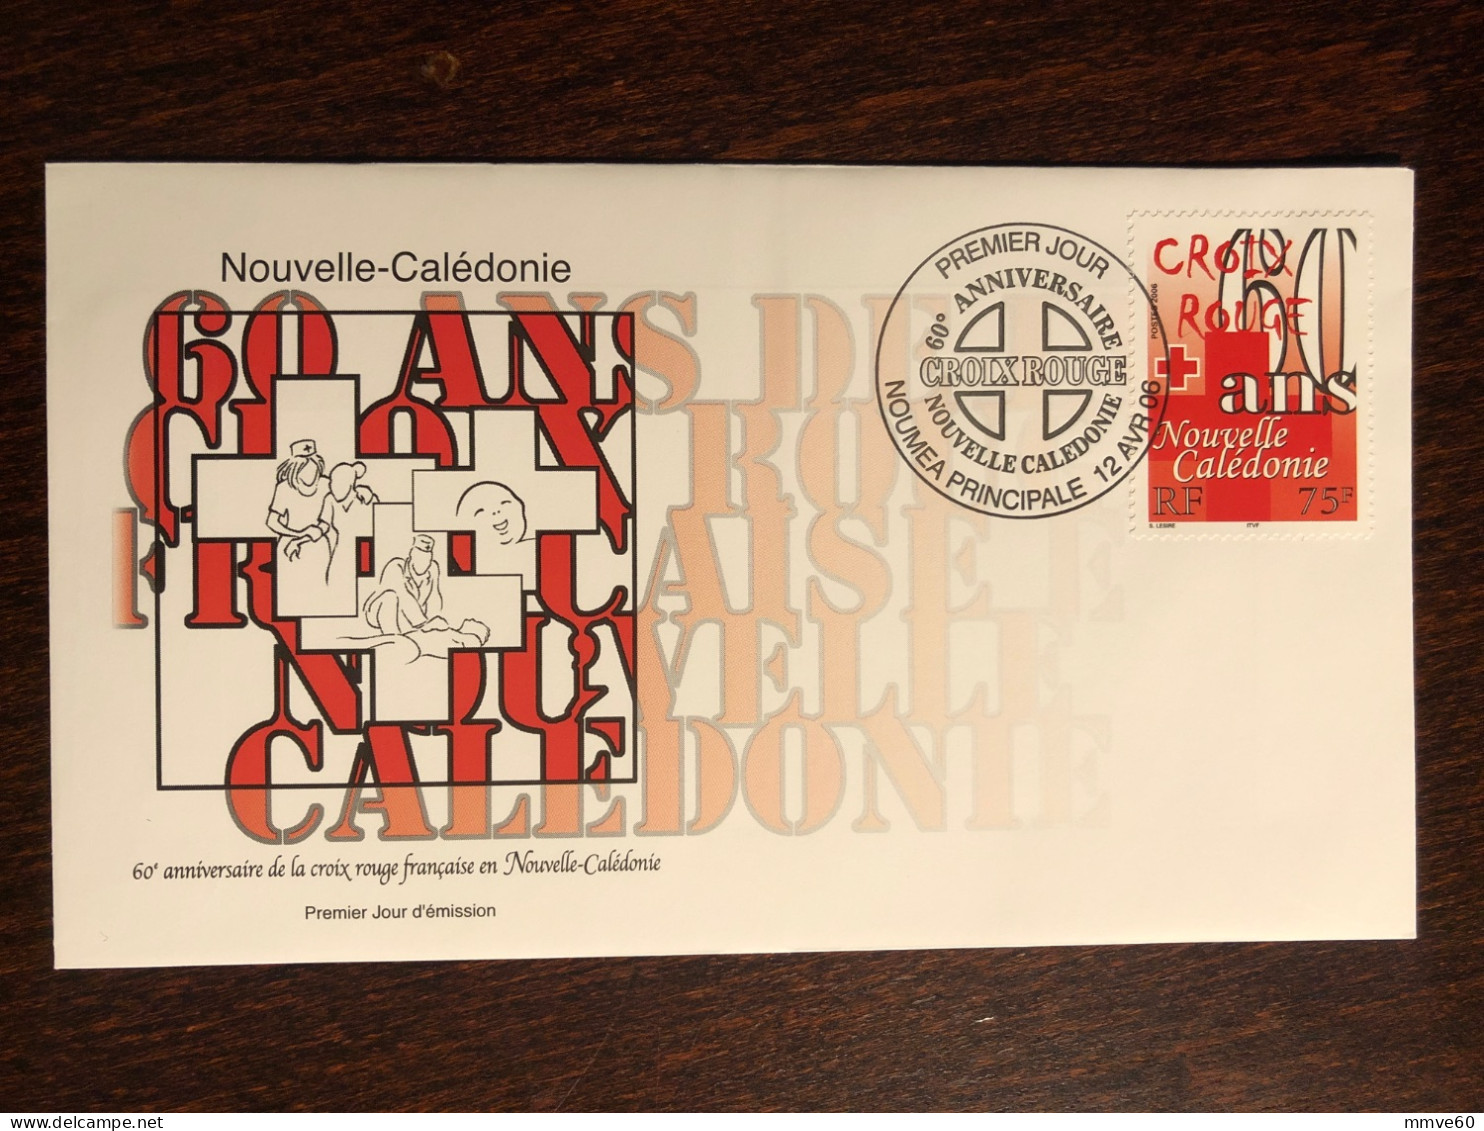 NEW CALEDONIA NOUVELLE CALEDONIE FDC COVER 2006 YEAR RED CROSS CROIX ROUGE HEALTH MEDICINE - Covers & Documents